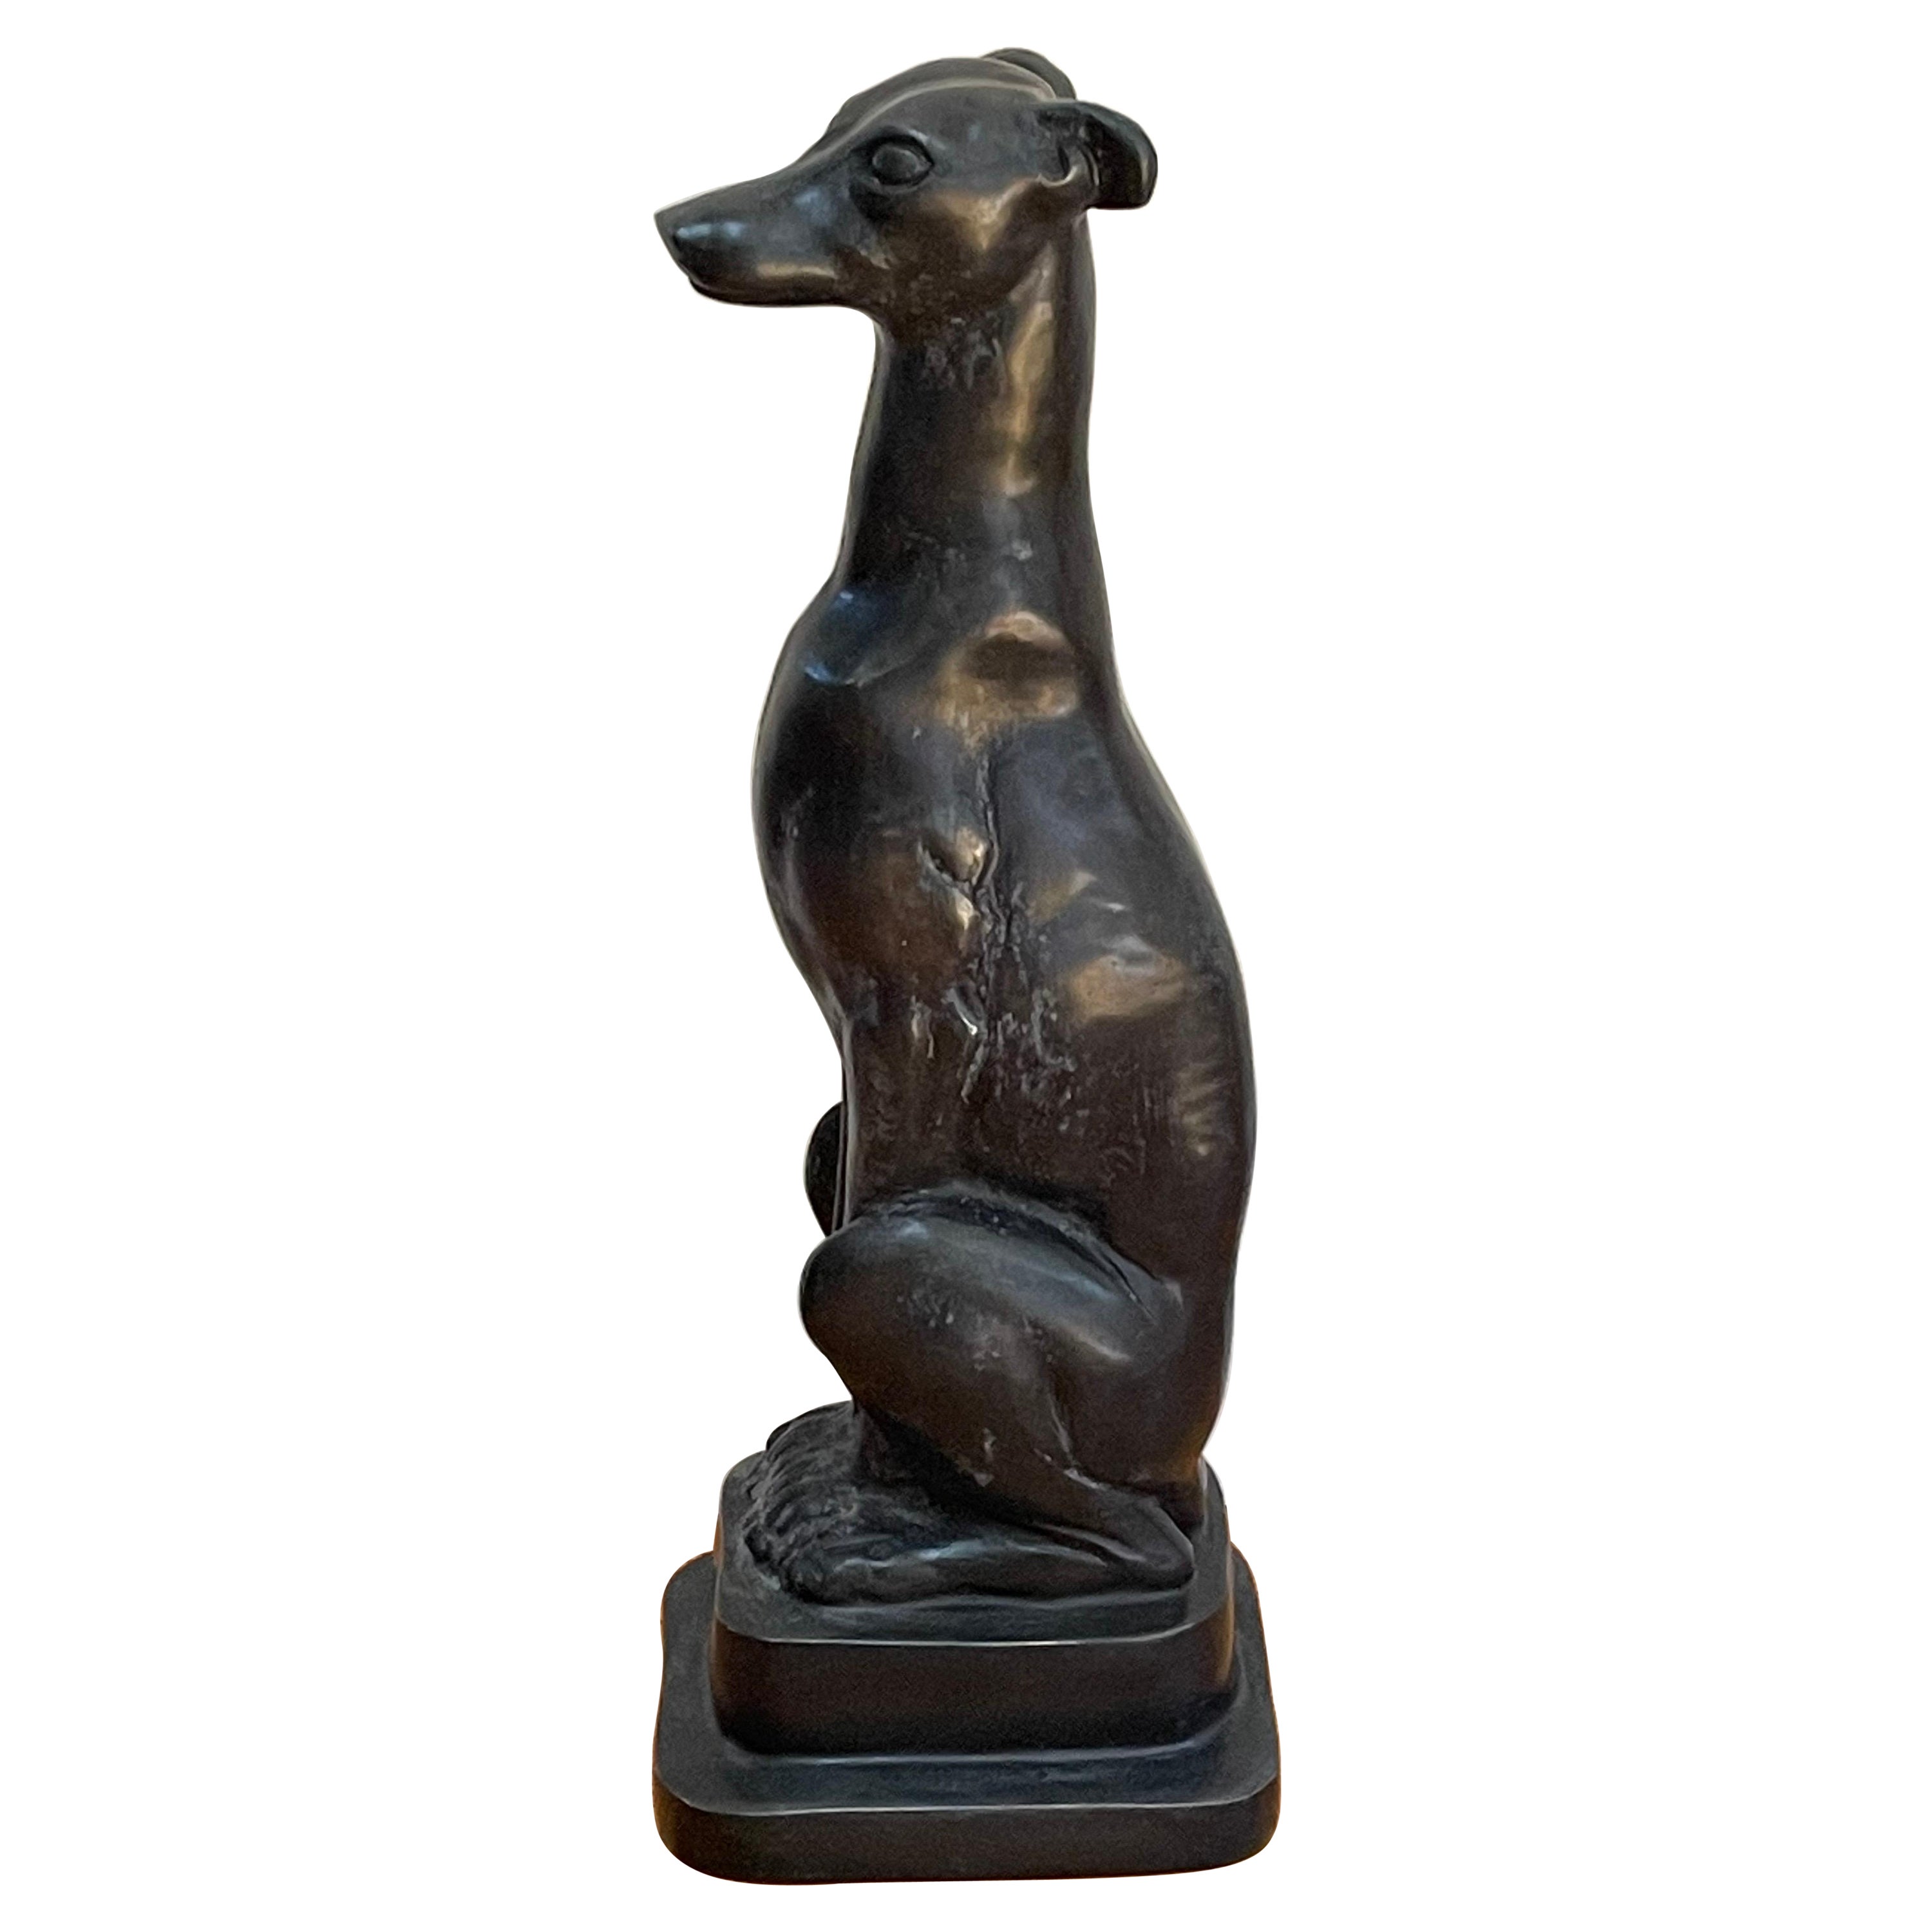 Seated Bronze Whippet or Greyhound Dog Sculpture, England, Early 20th Century